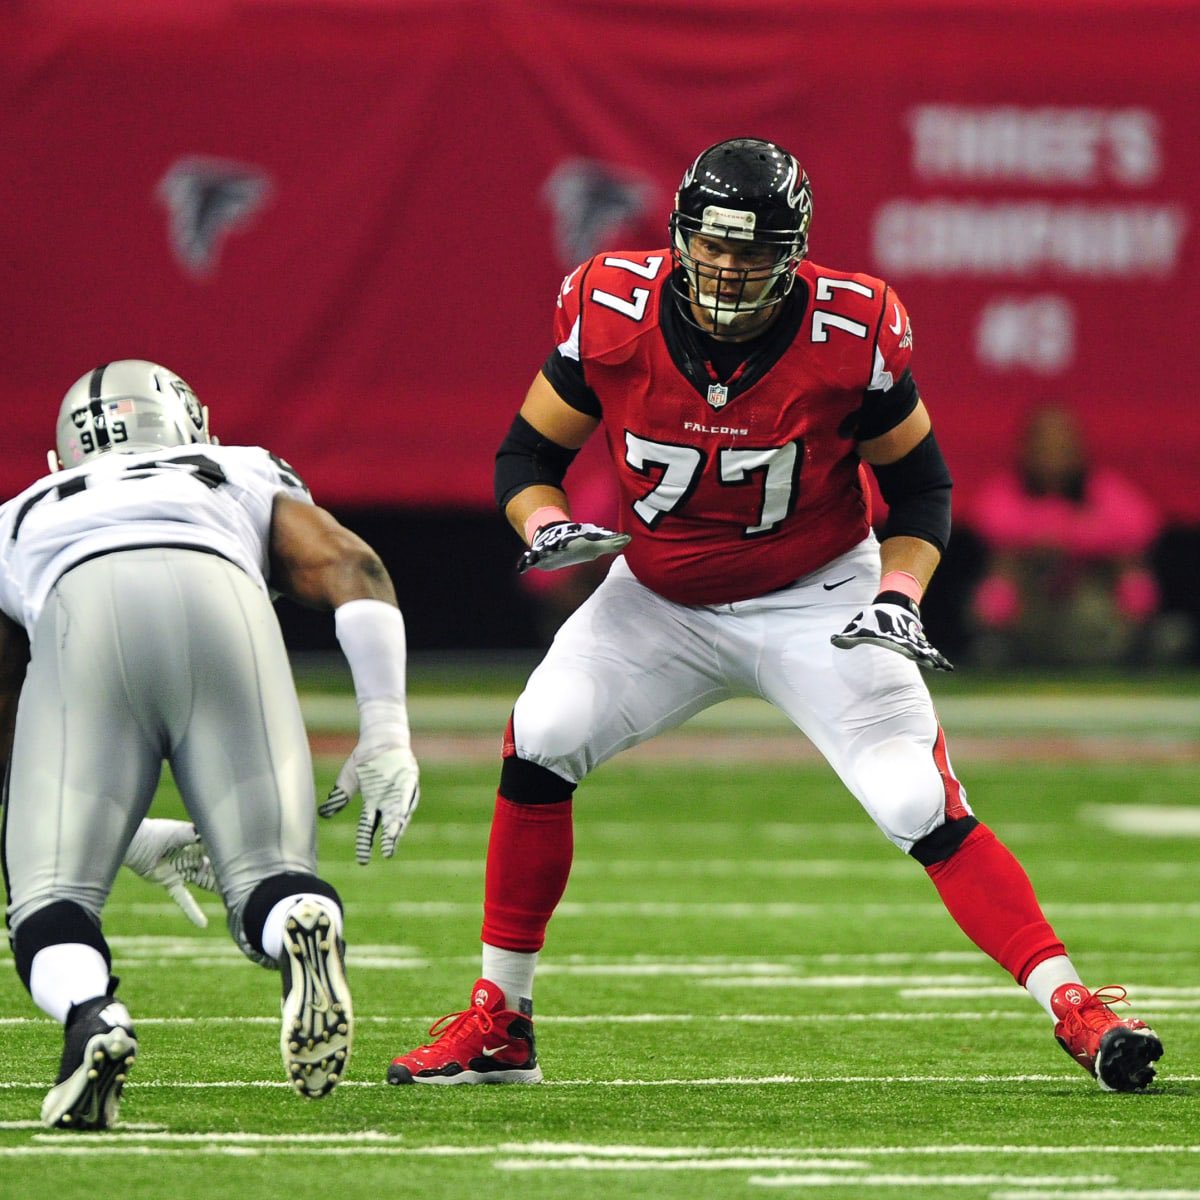 Atlanta Falcons I won’t let you forget. Tyson Clabo No. 77 RT 2005-2012 Clabo is one of the few gems that the Falcons have found. An UDFA that landed on the Falcons practice squad in 05. Clabo was officially signed in 06 and made the starter at RT, where he anchored the…